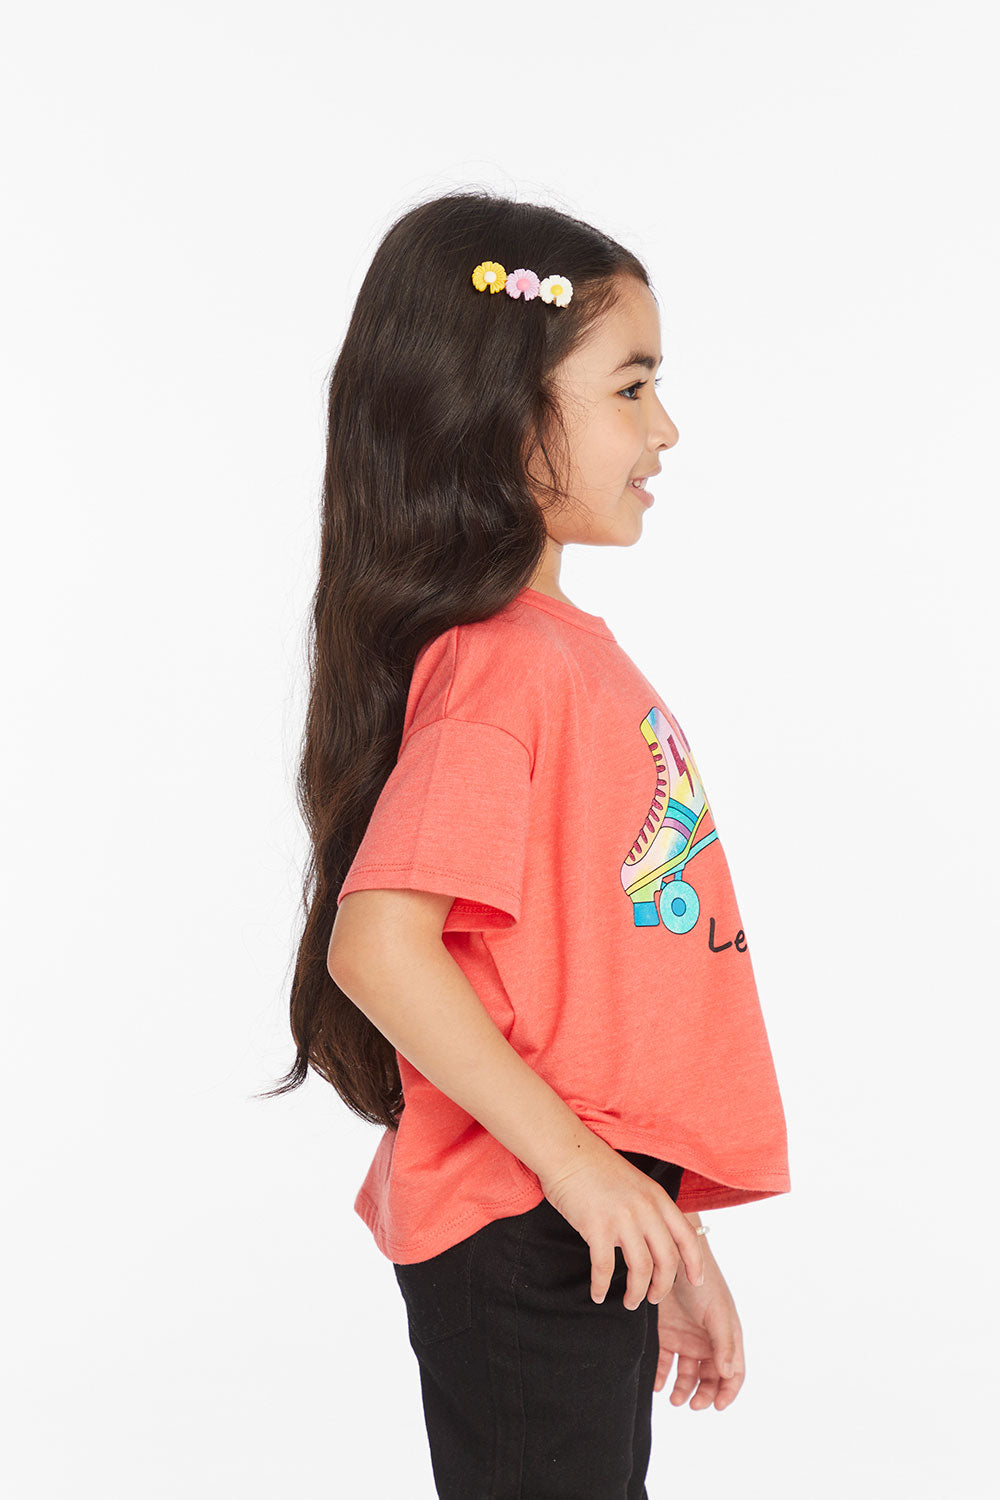 Lets Roll Girls Tee Girls chaserbrand